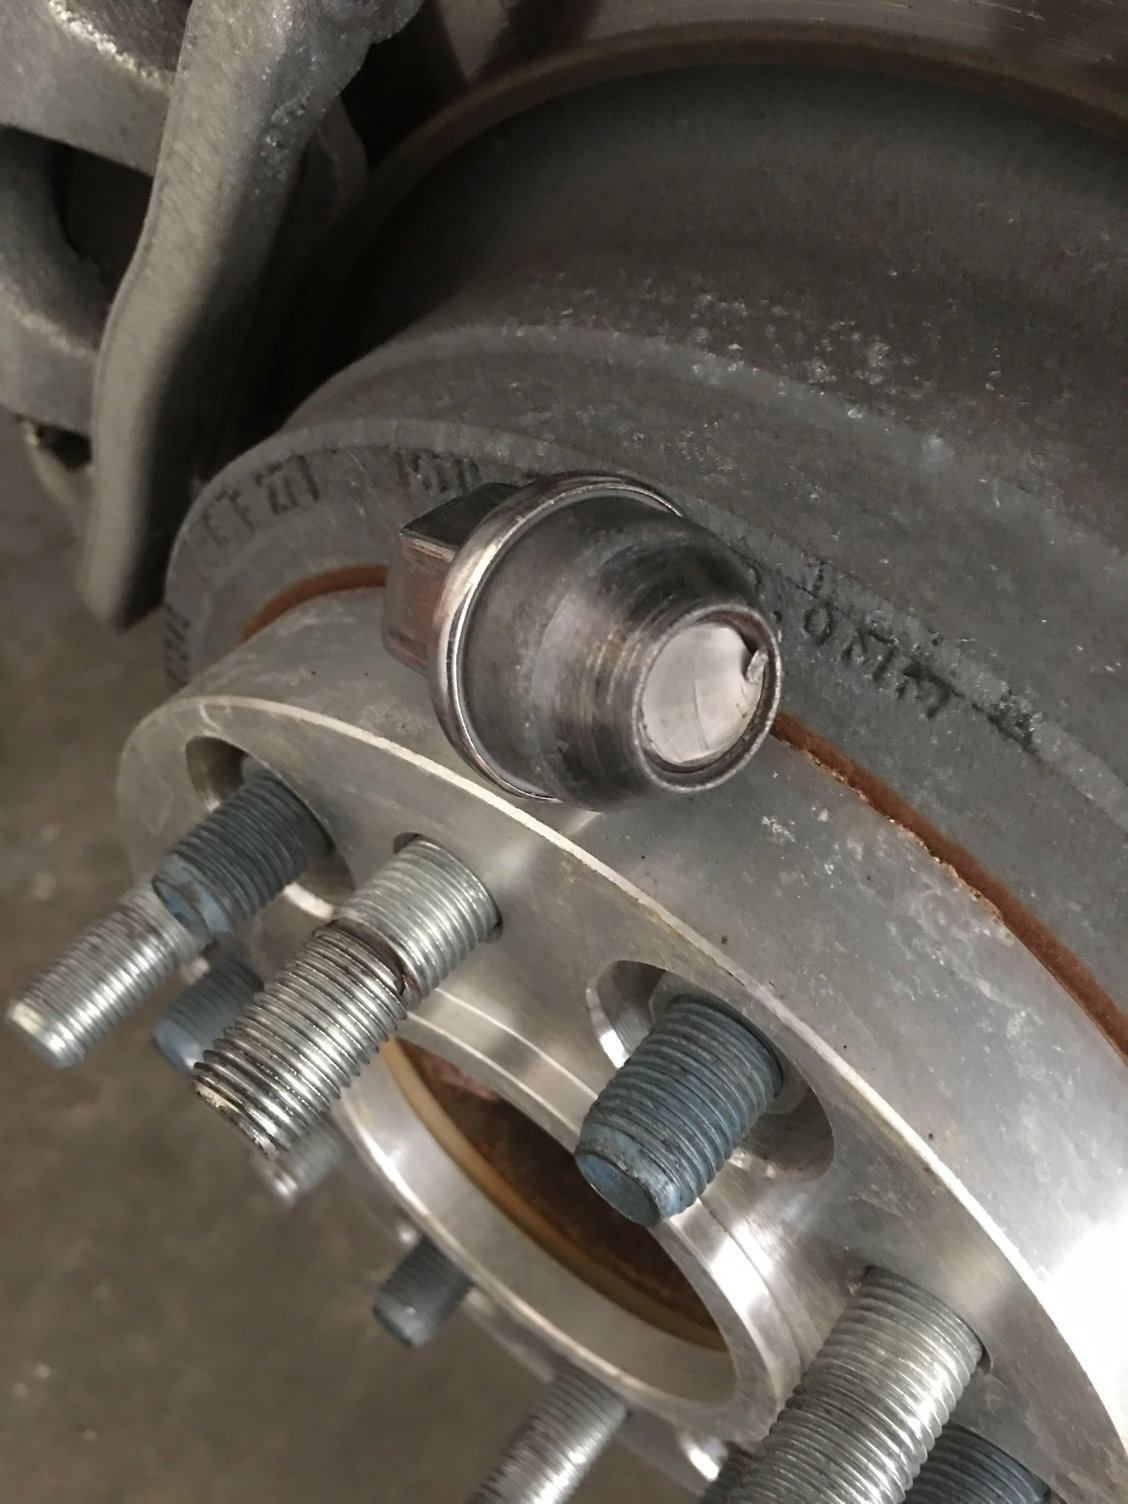 Ditching My Unsafe Wheel Spacers - Ford F150 Forum - Community of